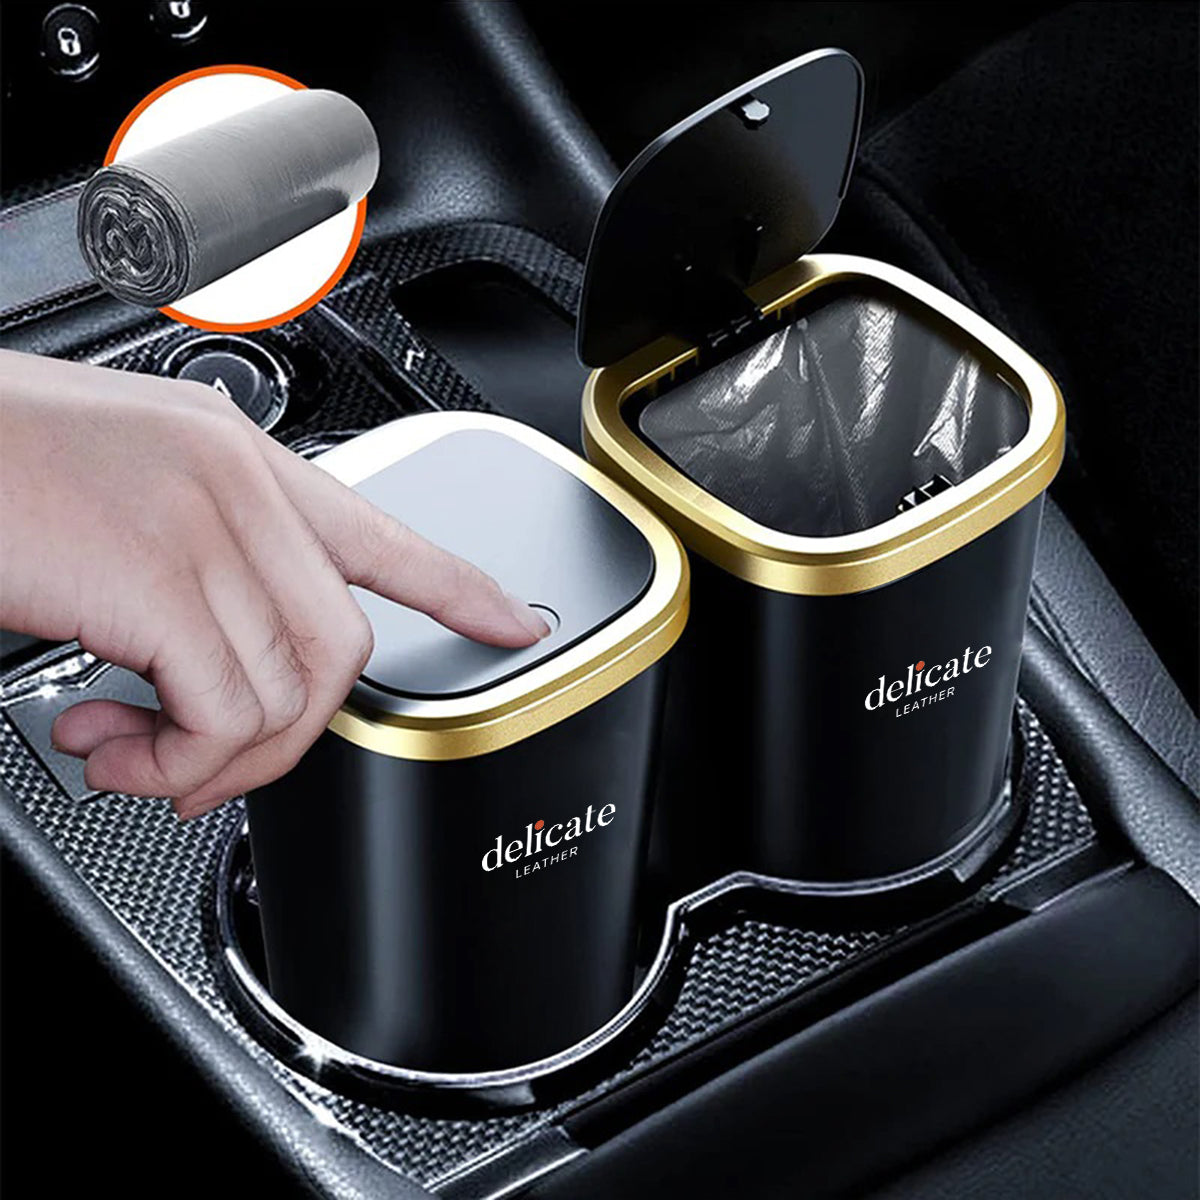 Car Trash Cans, Custom For Your Cars, Compact & Durable Car Accessories for Interior Use 2 Pack, Practical Car Organizers and Storage Cups with Pop-Up Open, Car Accessories LM11993 - Delicate Leather